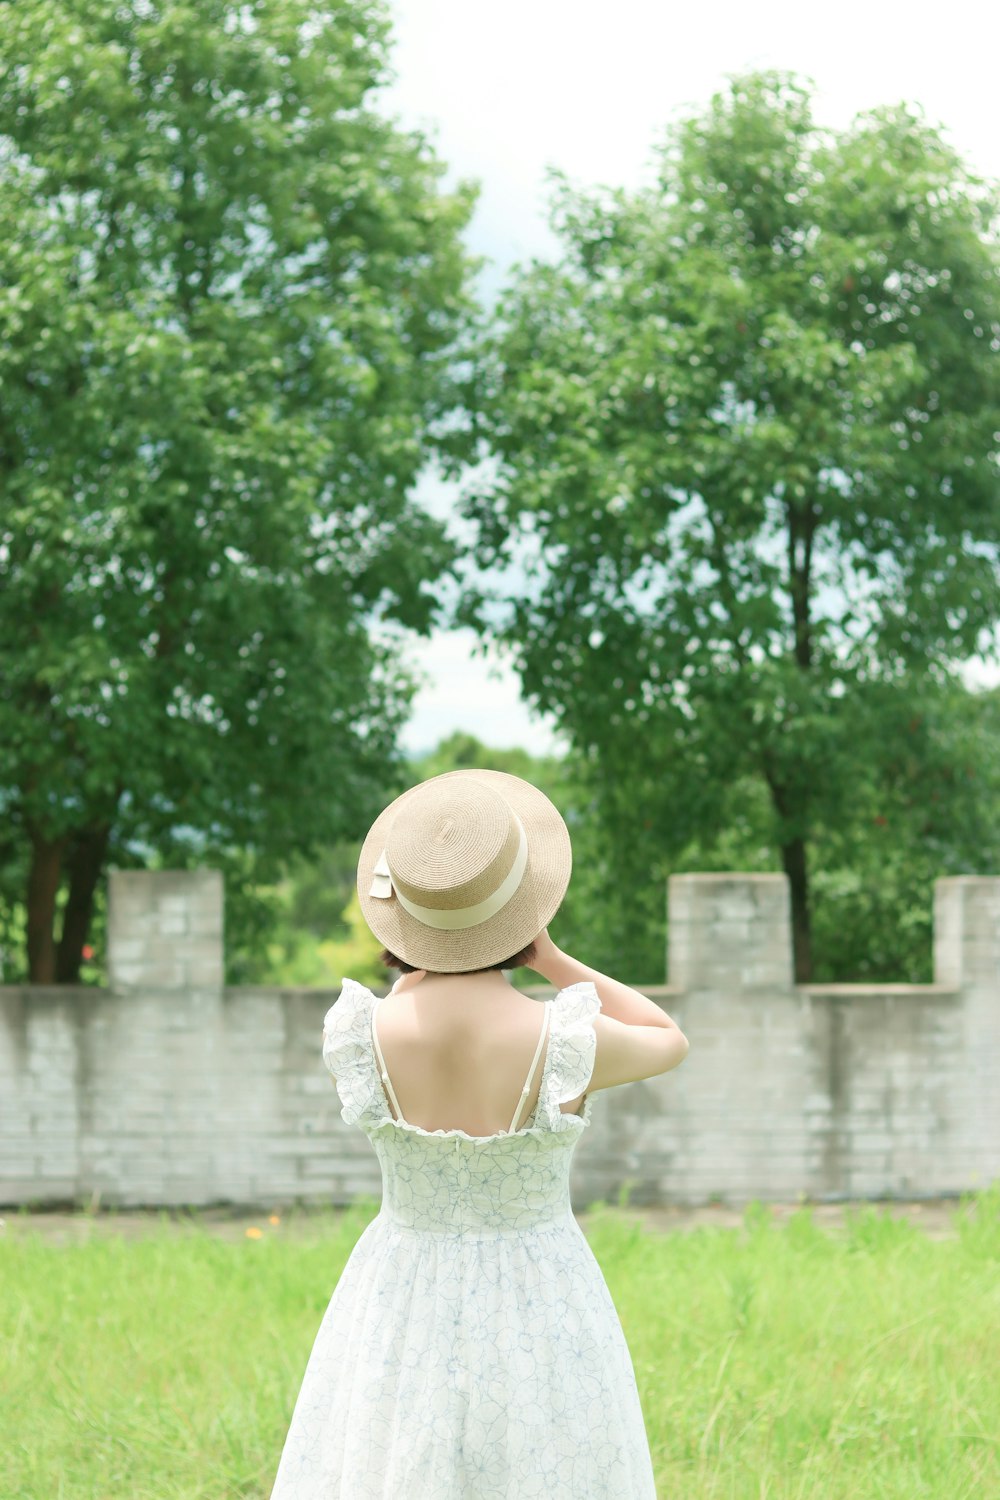 woman in white floral lace dress wearing brown sun hat standing on green grass field during